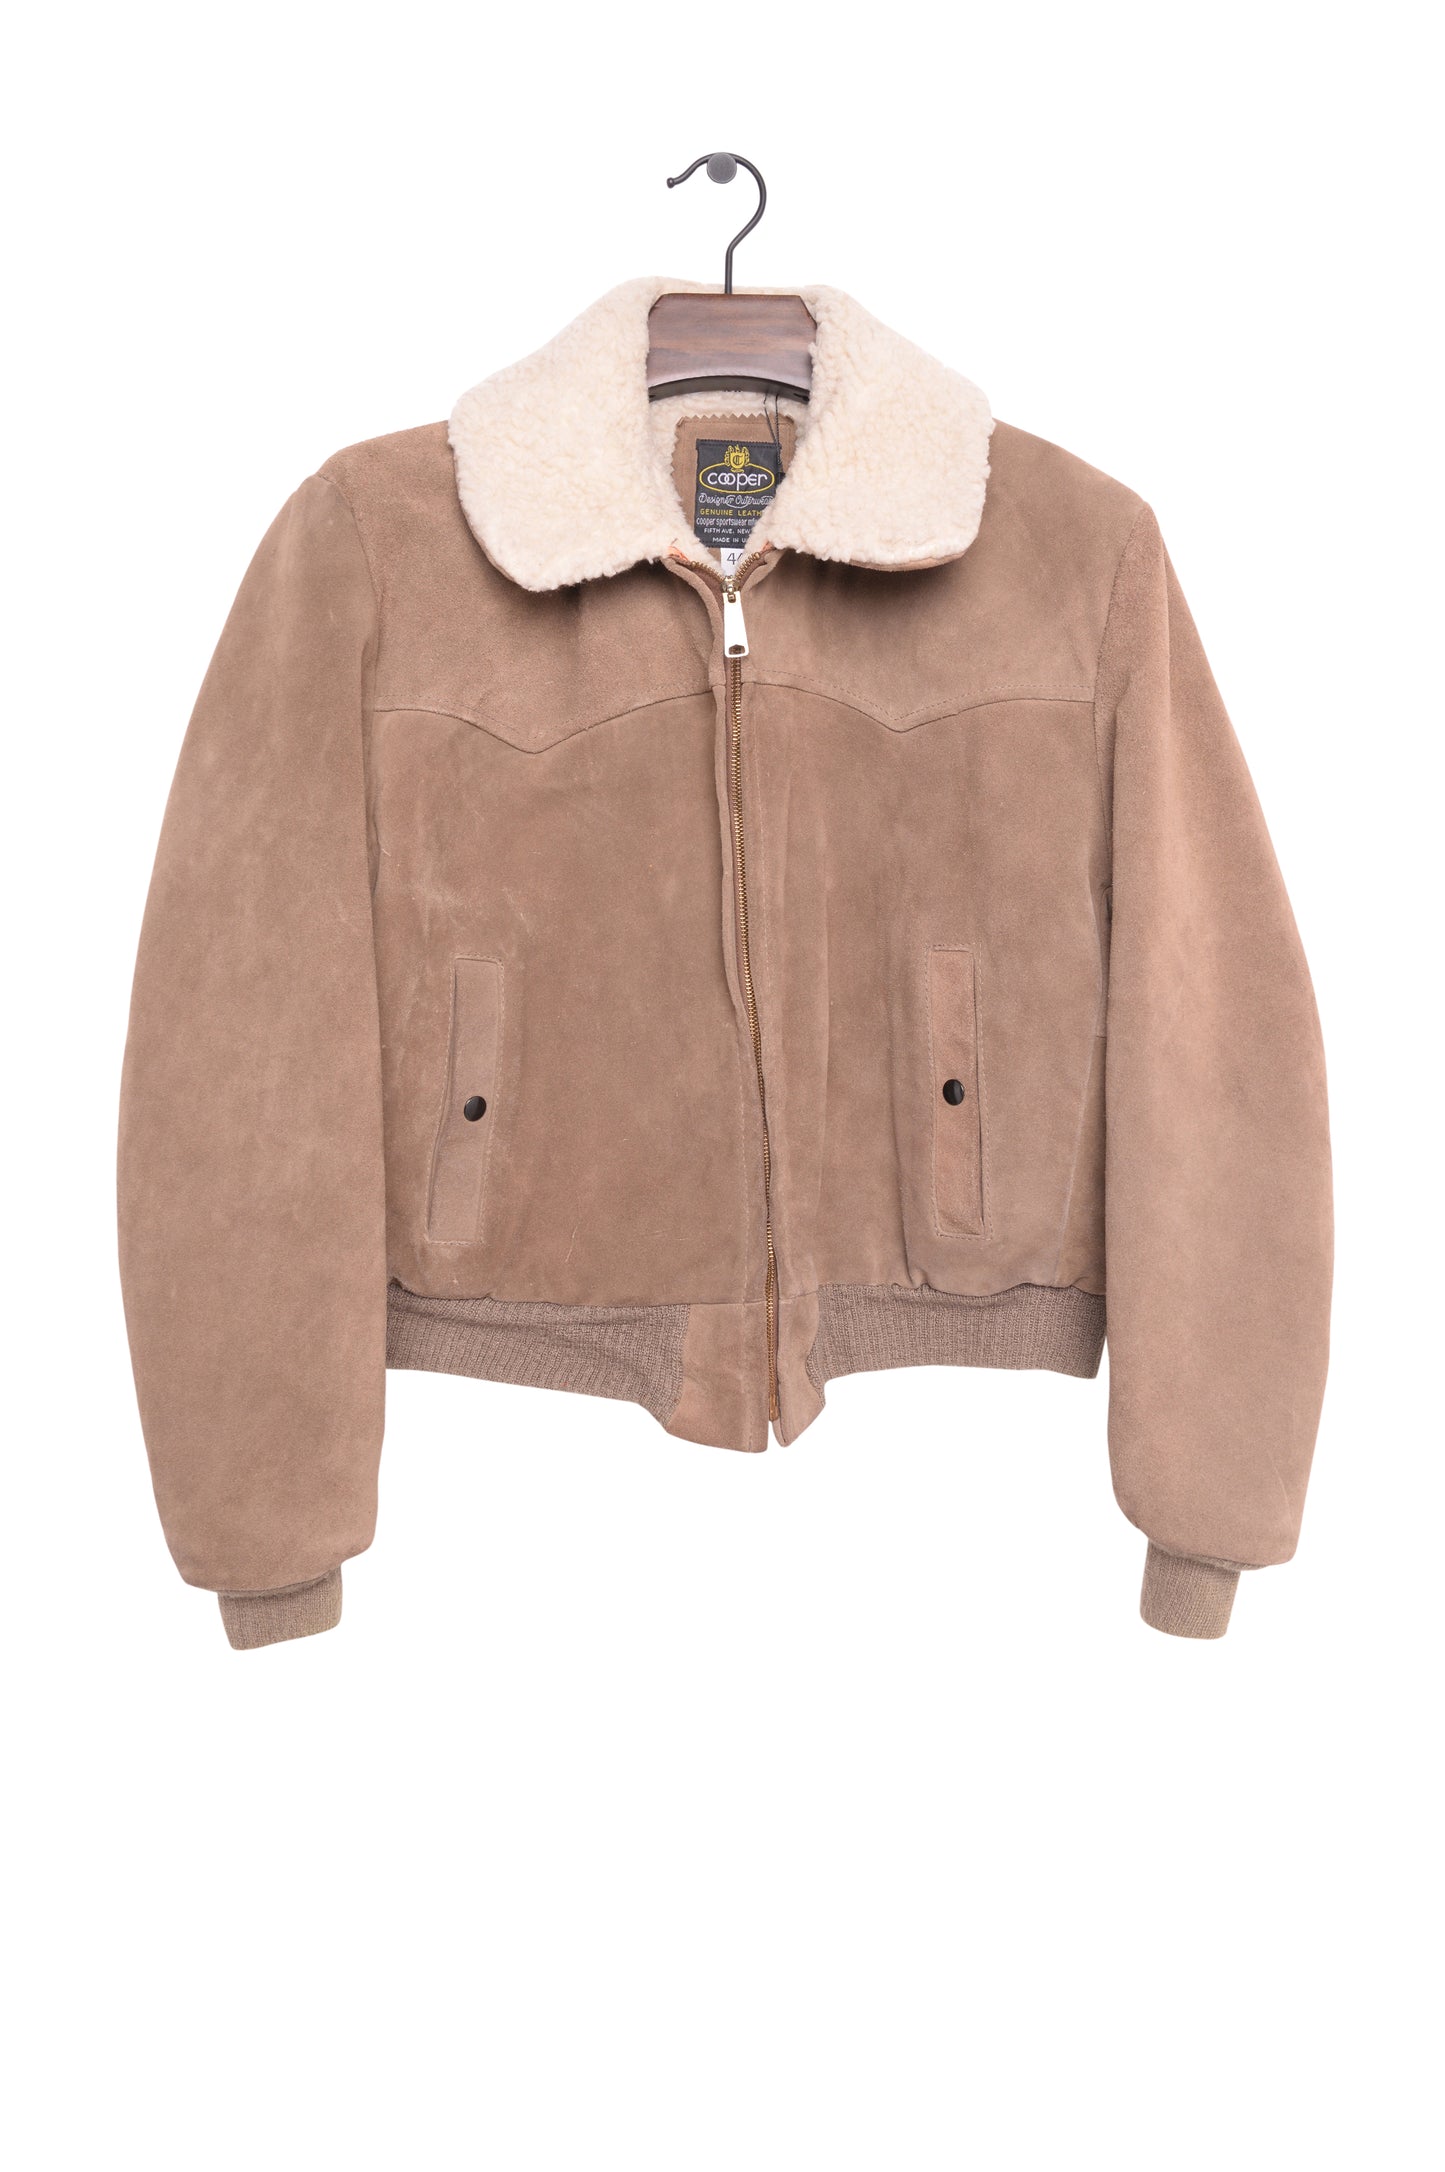 1960s Shearling Leather Bomber USA